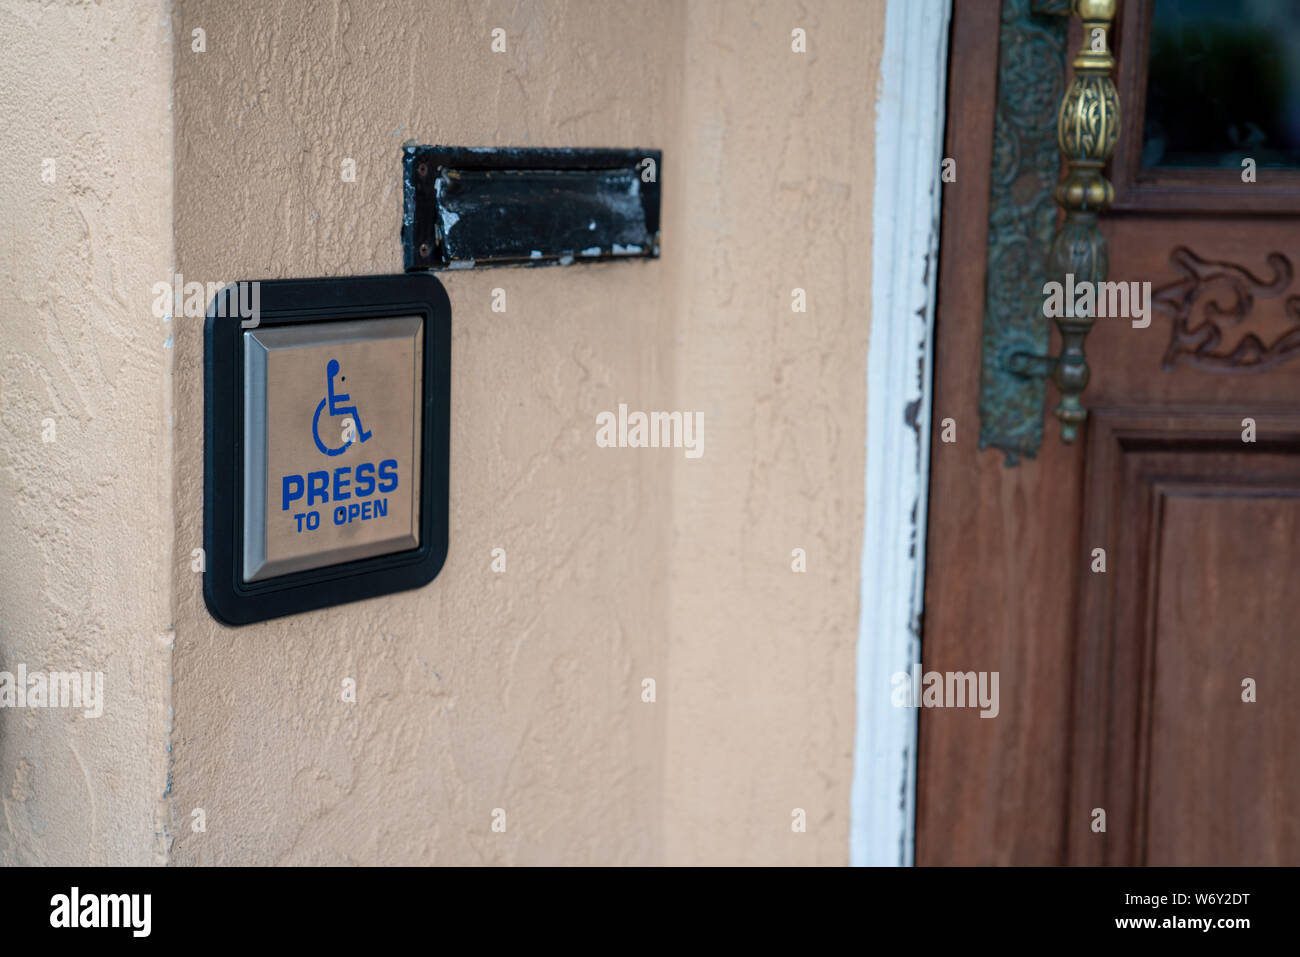 Press to open handicap button disability accessibility outside of door entrance Stock Photo